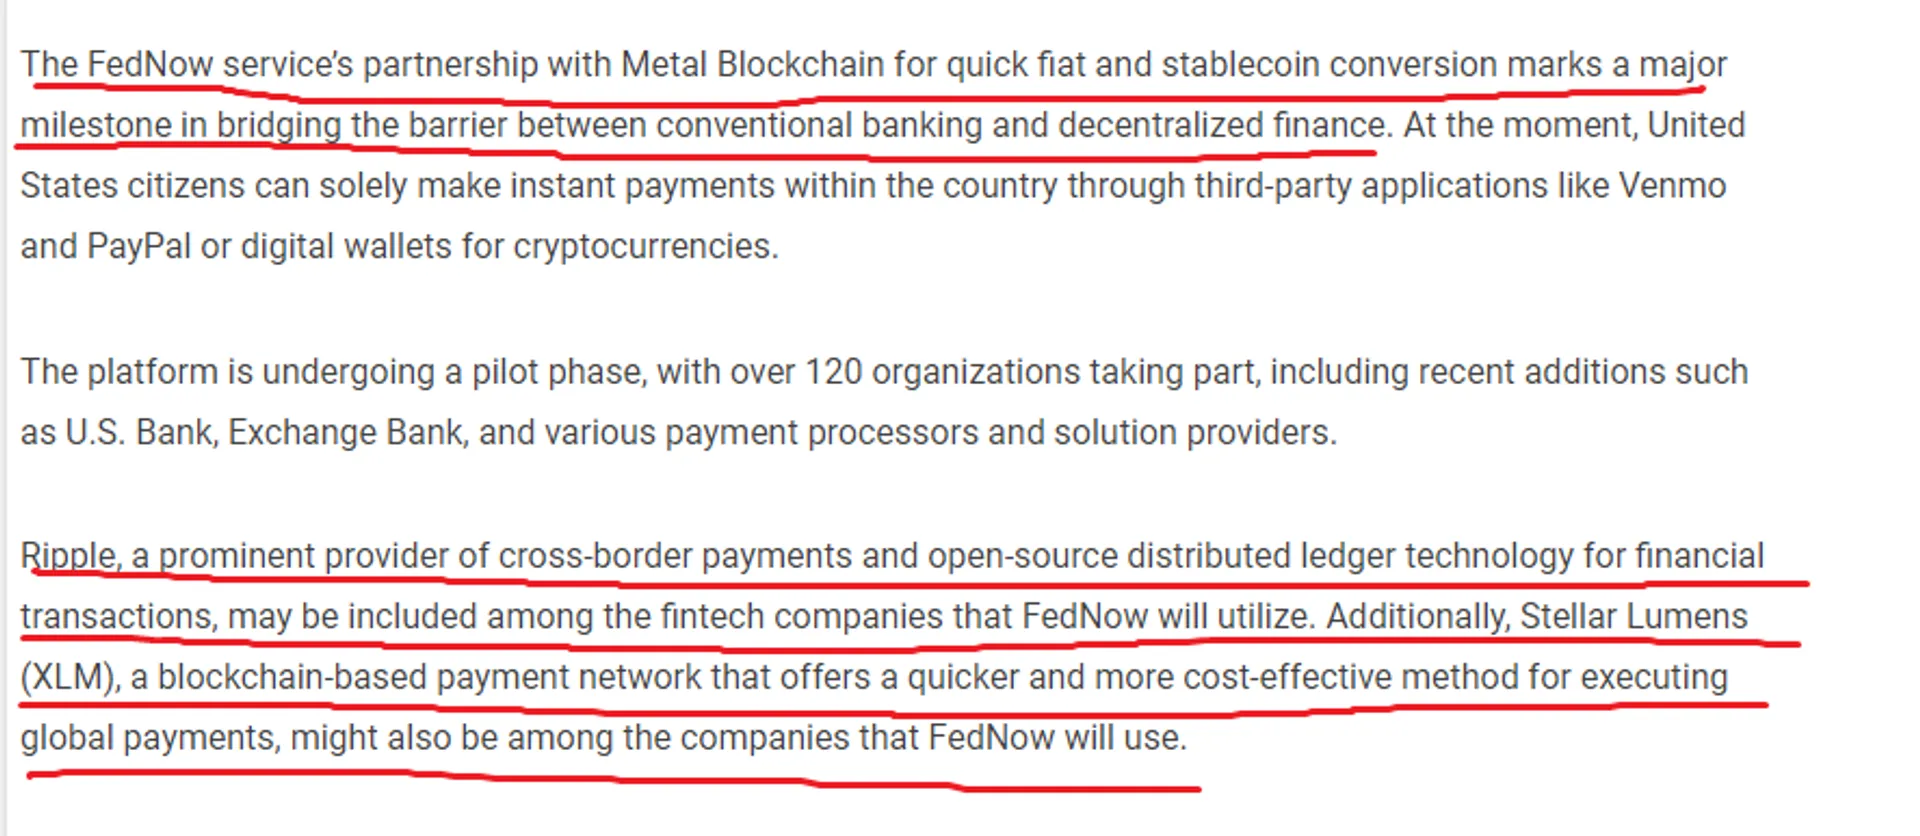 🚨 Breaking News: Federal Reserve Publicly Considers XRP for FedNow Payment System's Blockchain Aspect 🏦💼

In a significant and long-anticipated development, the Federal Reserve has officially acknowledged the potential use of XRP, the cryptocurrency associated with Ripple, to facilitate the blockchain component of their FedNow Payment System. This announcement comes following months of speculation and rumours regarding private meetings between Federal Reserve officials and Ripple representatives.

Key Highlights:
📊 Blockchain Integration: The Federal Reserve's interest in XRP underscores its commitment to harnessing the capabilities of blockchain technology to enhance the efficiency and security of the FedNow Payment System.

🤝 Collaborative Efforts: The public acknowledgement of discussions between the Federal Reserve and Ripple suggests a collaborative approach to leverage Ripple's blockchain expertise to develop a state-of-the-art payment system.

💼 Market Implications: This recognition by a major financial institution is expected to profoundly impact the cryptocurrency market and XRP's position within it. It underscores the growing acceptance of cryptocurrencies by traditional financial institutions.

The FedNow Payment System, designed to provide real-time payments, has been a focal point for modernizing the U.S. payment infrastructure. The potential integration of XRP into this system is a significant step toward realizing the benefits of blockchain technology in facilitating faster, more secure, and cost-effective transactions.

As discussions between the Federal Reserve and Ripple continue to evolve, the crypto community and financial industry eagerly await further details regarding this groundbreaking partnership. Stay tuned for updates on this game-changing development in blockchain and digital assets. 🌐💱 #FederalReserveXRPIntegration #BlockchainPayments